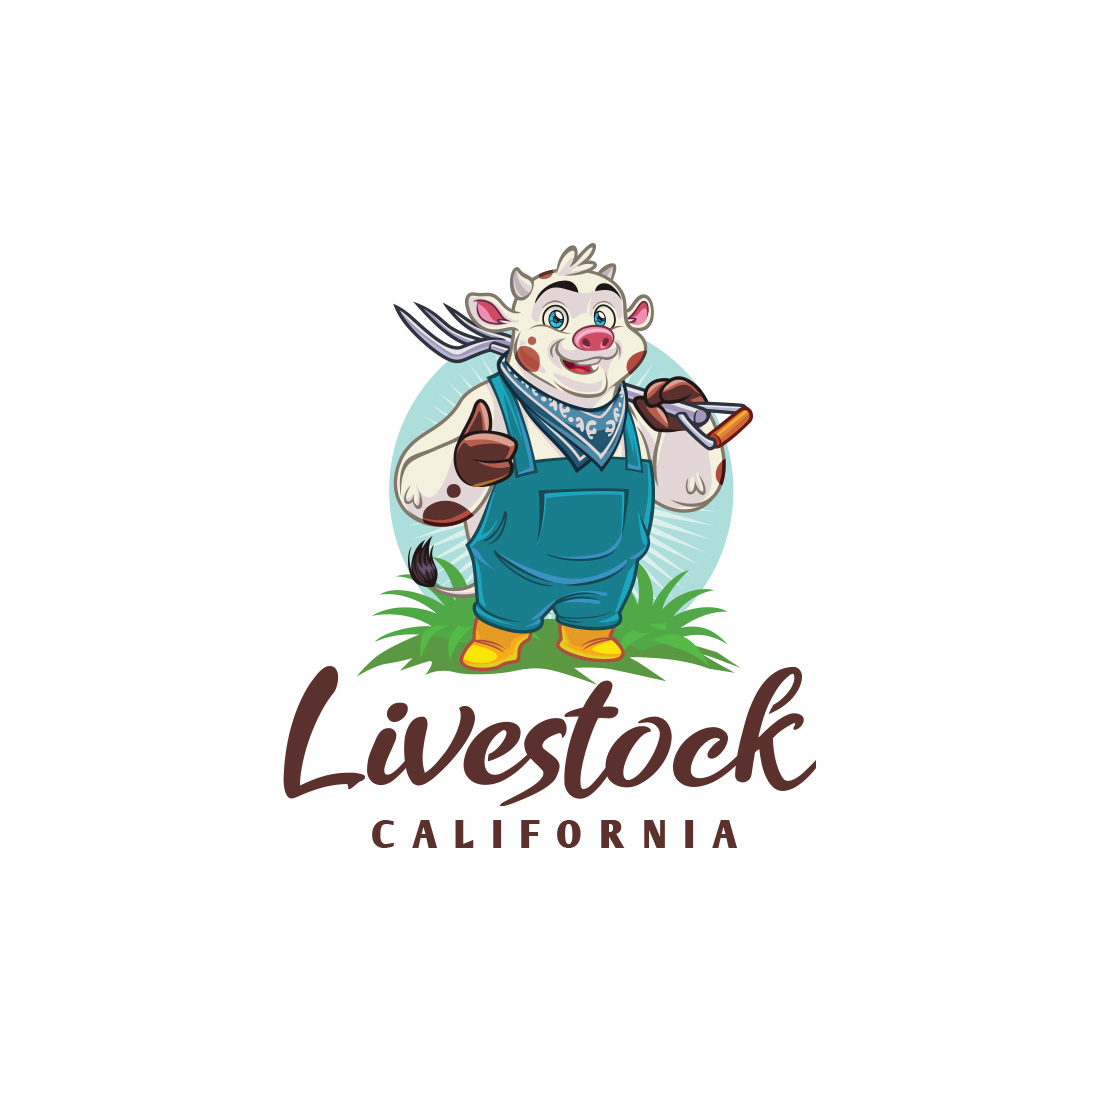 Live Stock Cow Character Logo Design cover image.